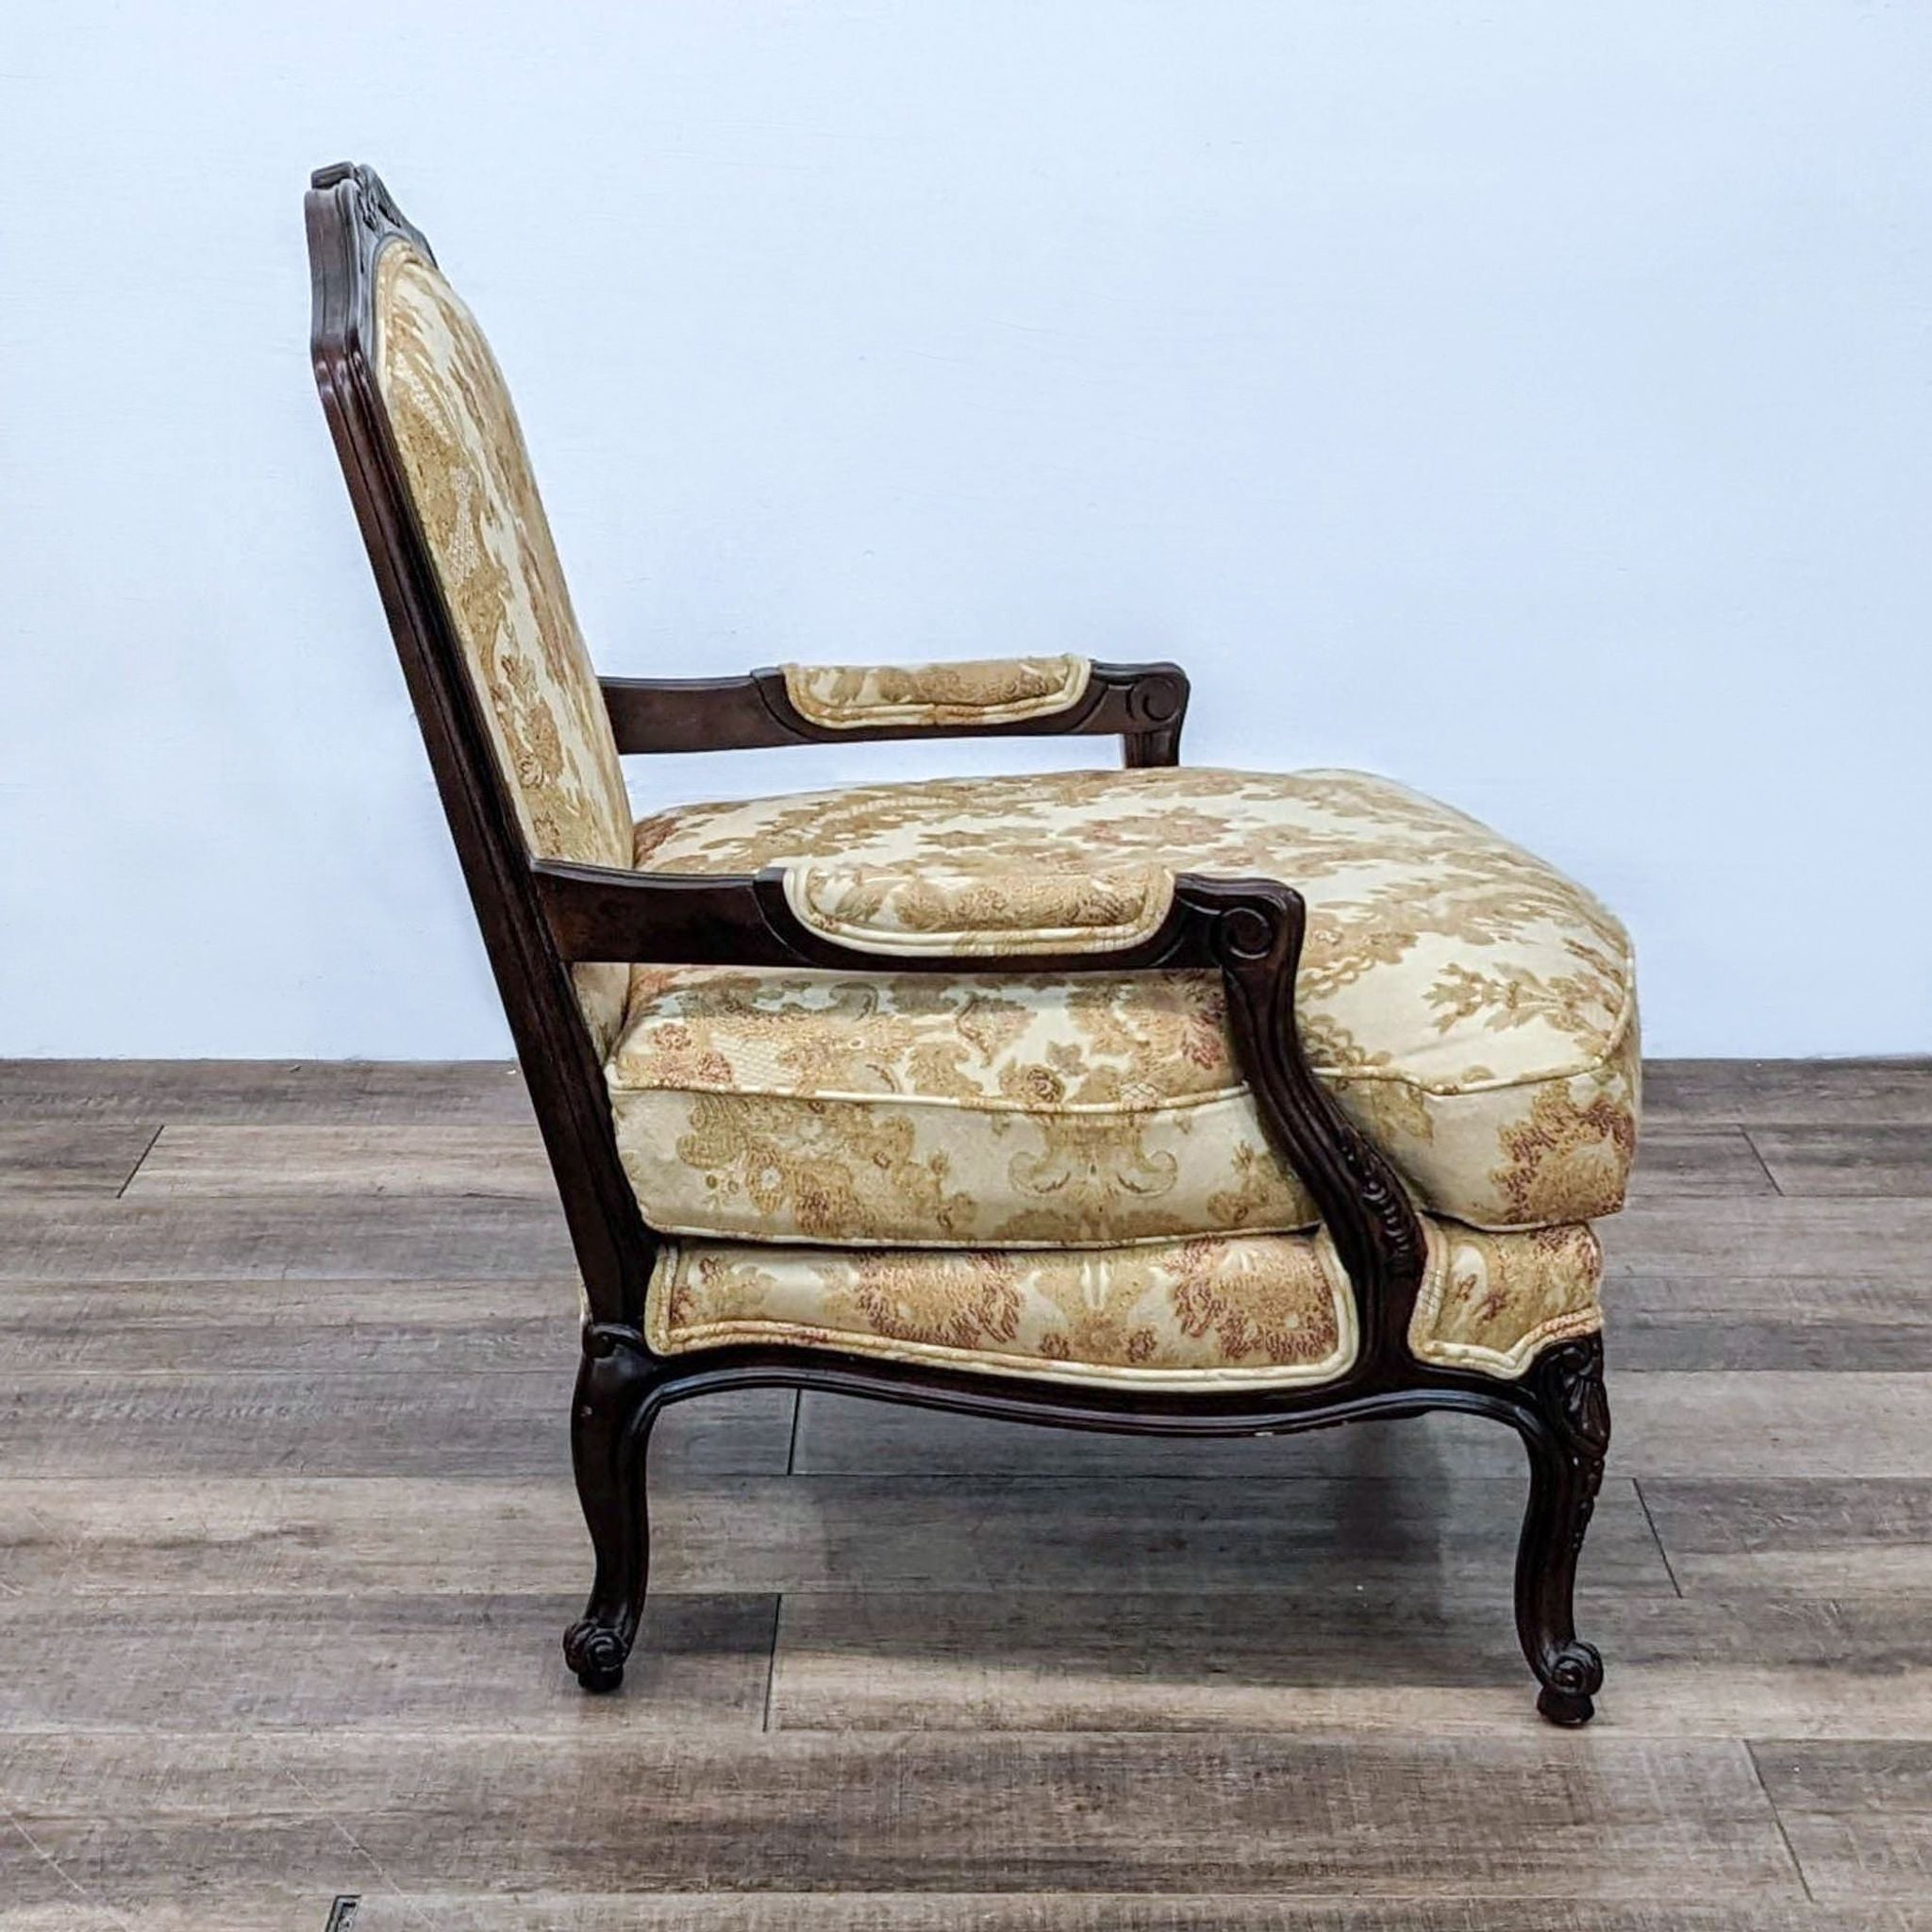 Side view of Thomasville Patriarch accent armchair showing detailed wood carving and patterned upholstery.